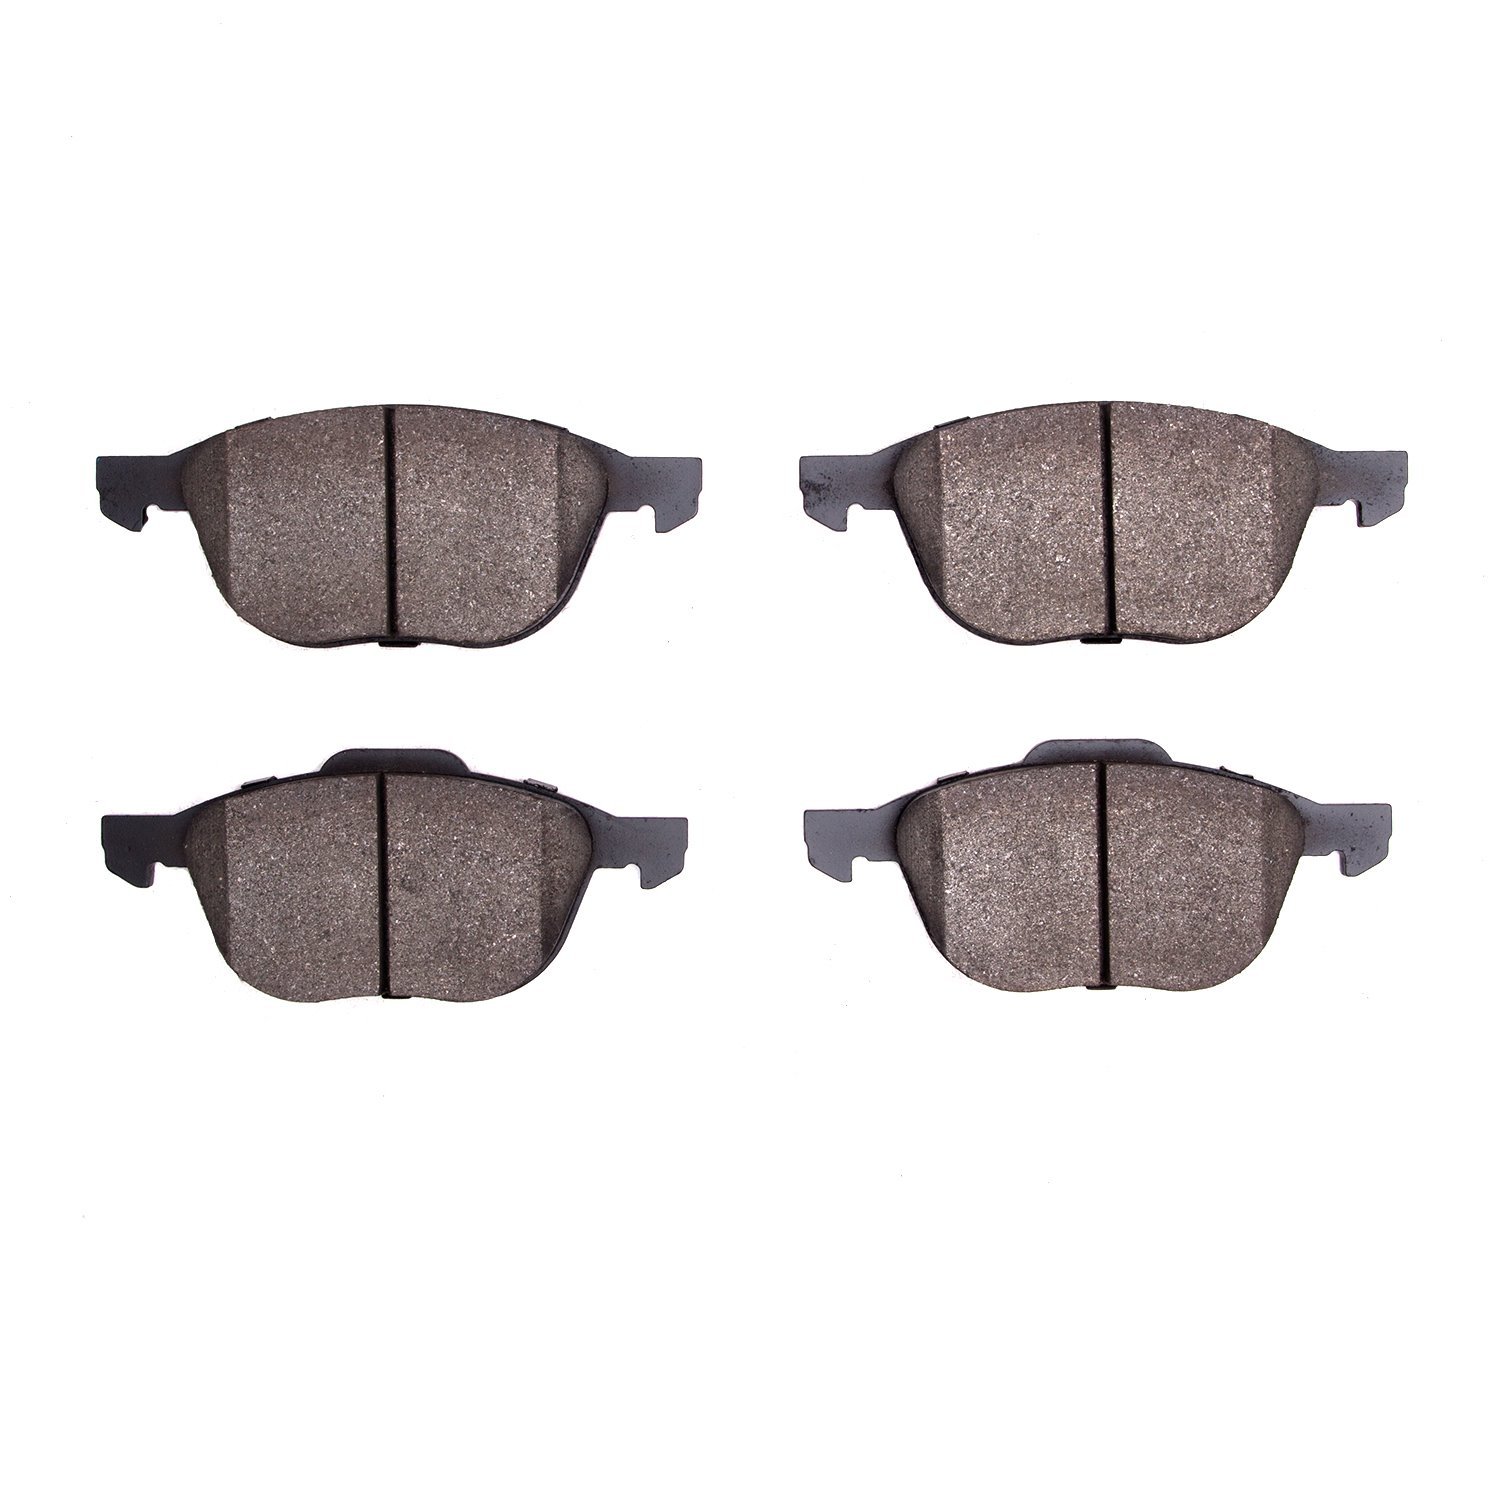 Optimum OE Brake Pads, 2004-2018 Ford/Lincoln/Mercury/Mazda, Position: Front